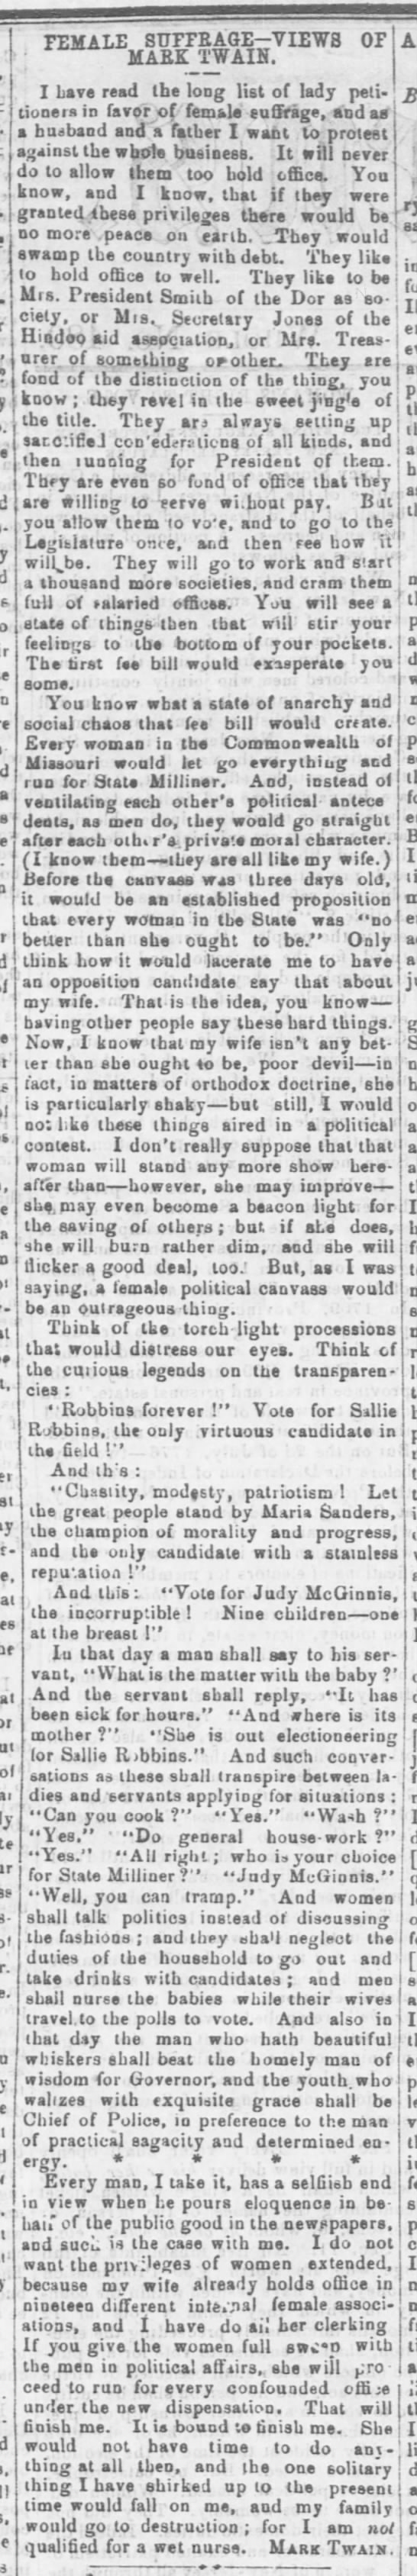 Mark Twain satire about women's suffrage from a 1867 newspaper - 